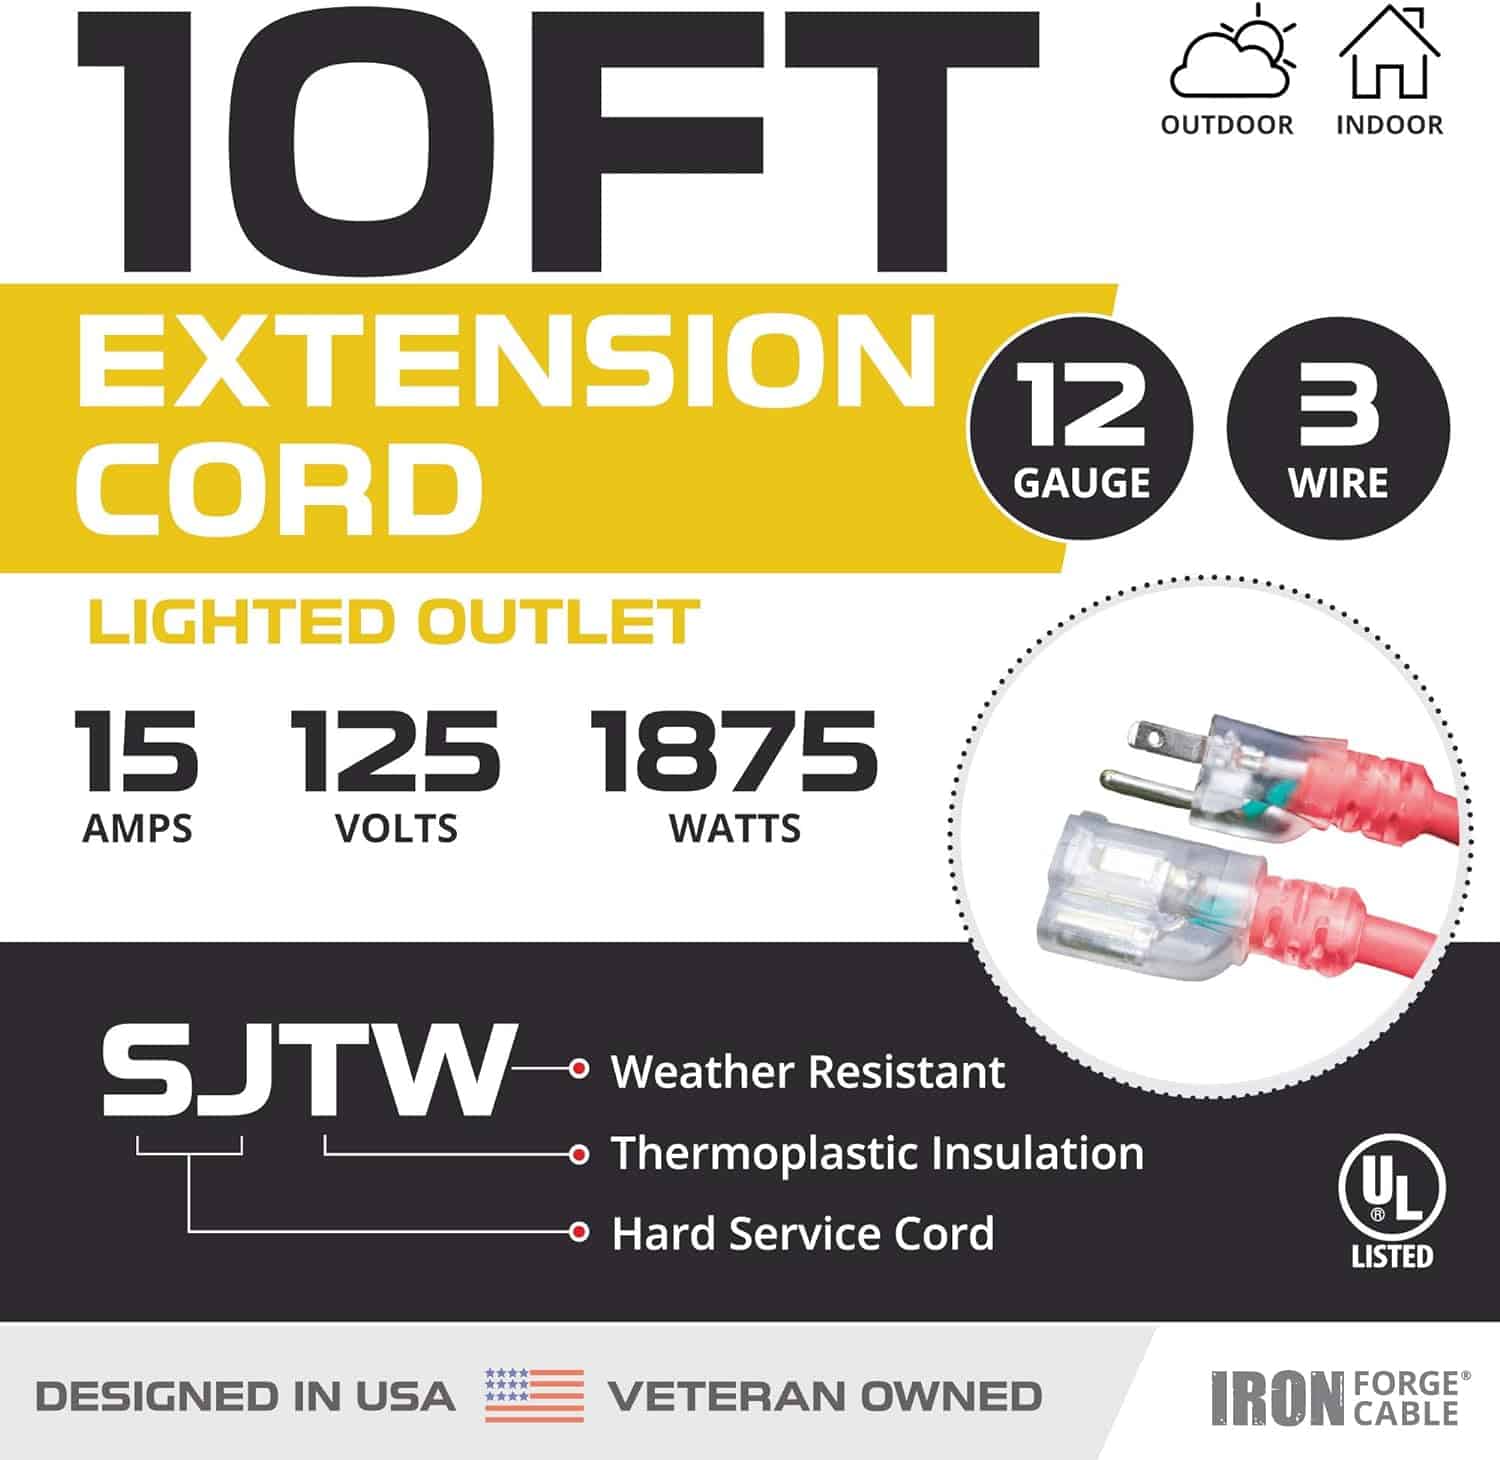 IRON-FORGE-12-Gauge-Extension-Cord-10-Ft-Lighted-Plug-12-AWG-Heavy-Duty-Extension-Cord-with-3-Prong-Construction-Grade-Red-Outdoor-Cord-12-3-SJTW-15AMP-Great-for-Major-Appliances-US-Veteran-Owned